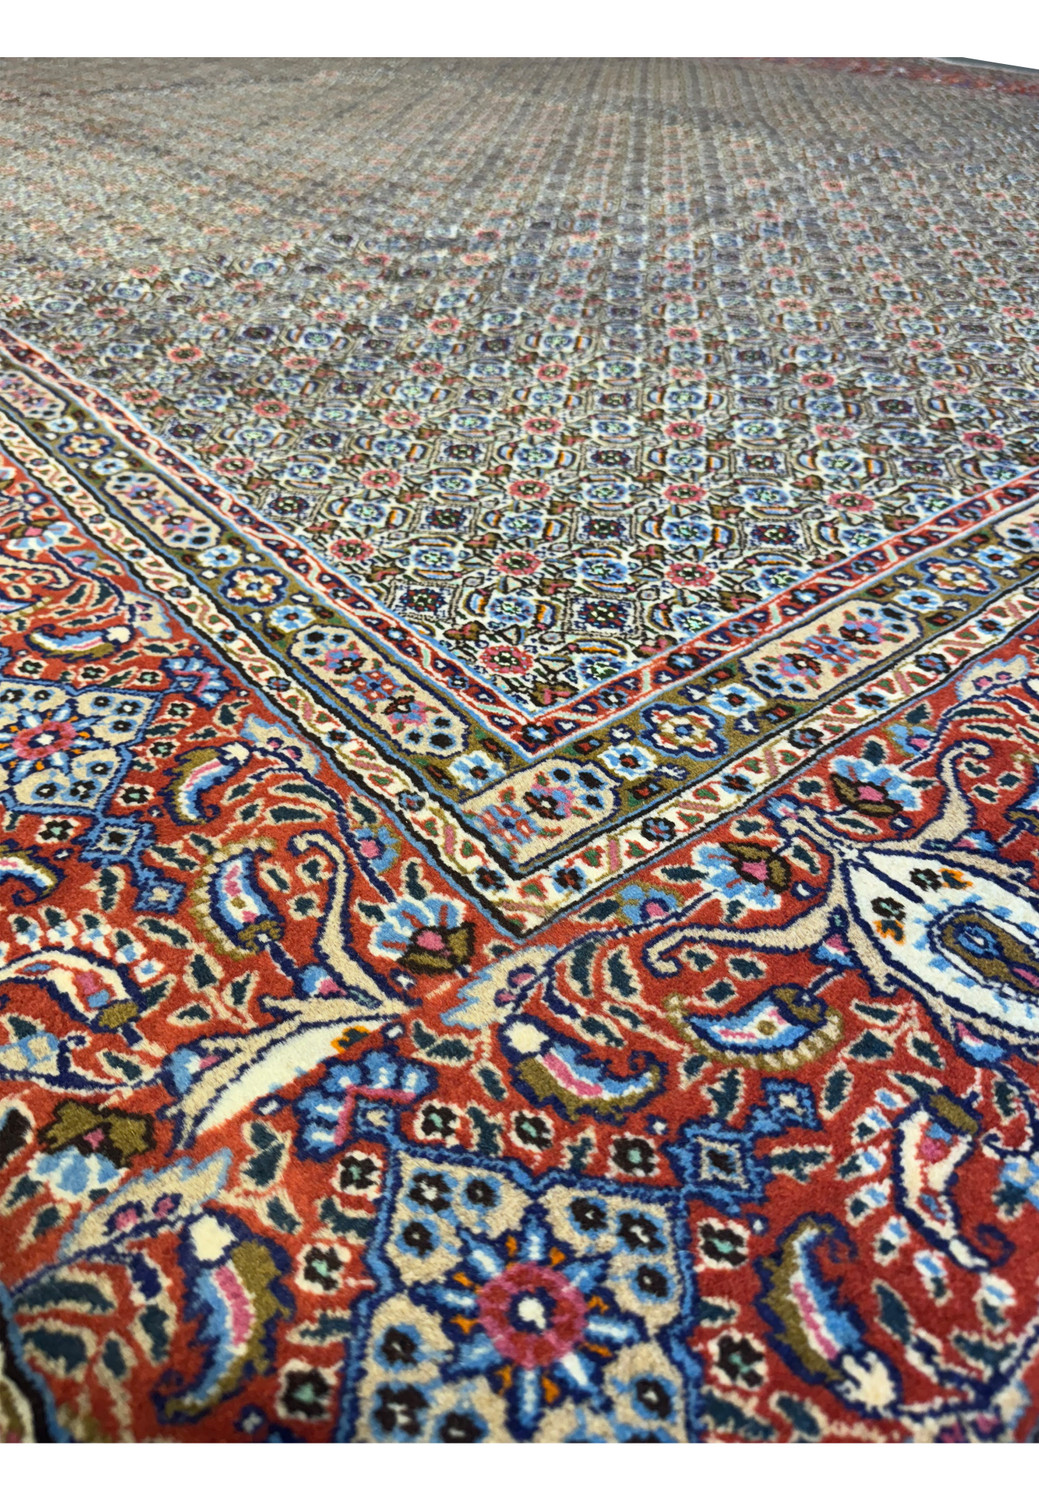 An angled close-up of the Persian Moud Rug's edge, exhibiting the detailed patterns and the vibrant contrast of colors.